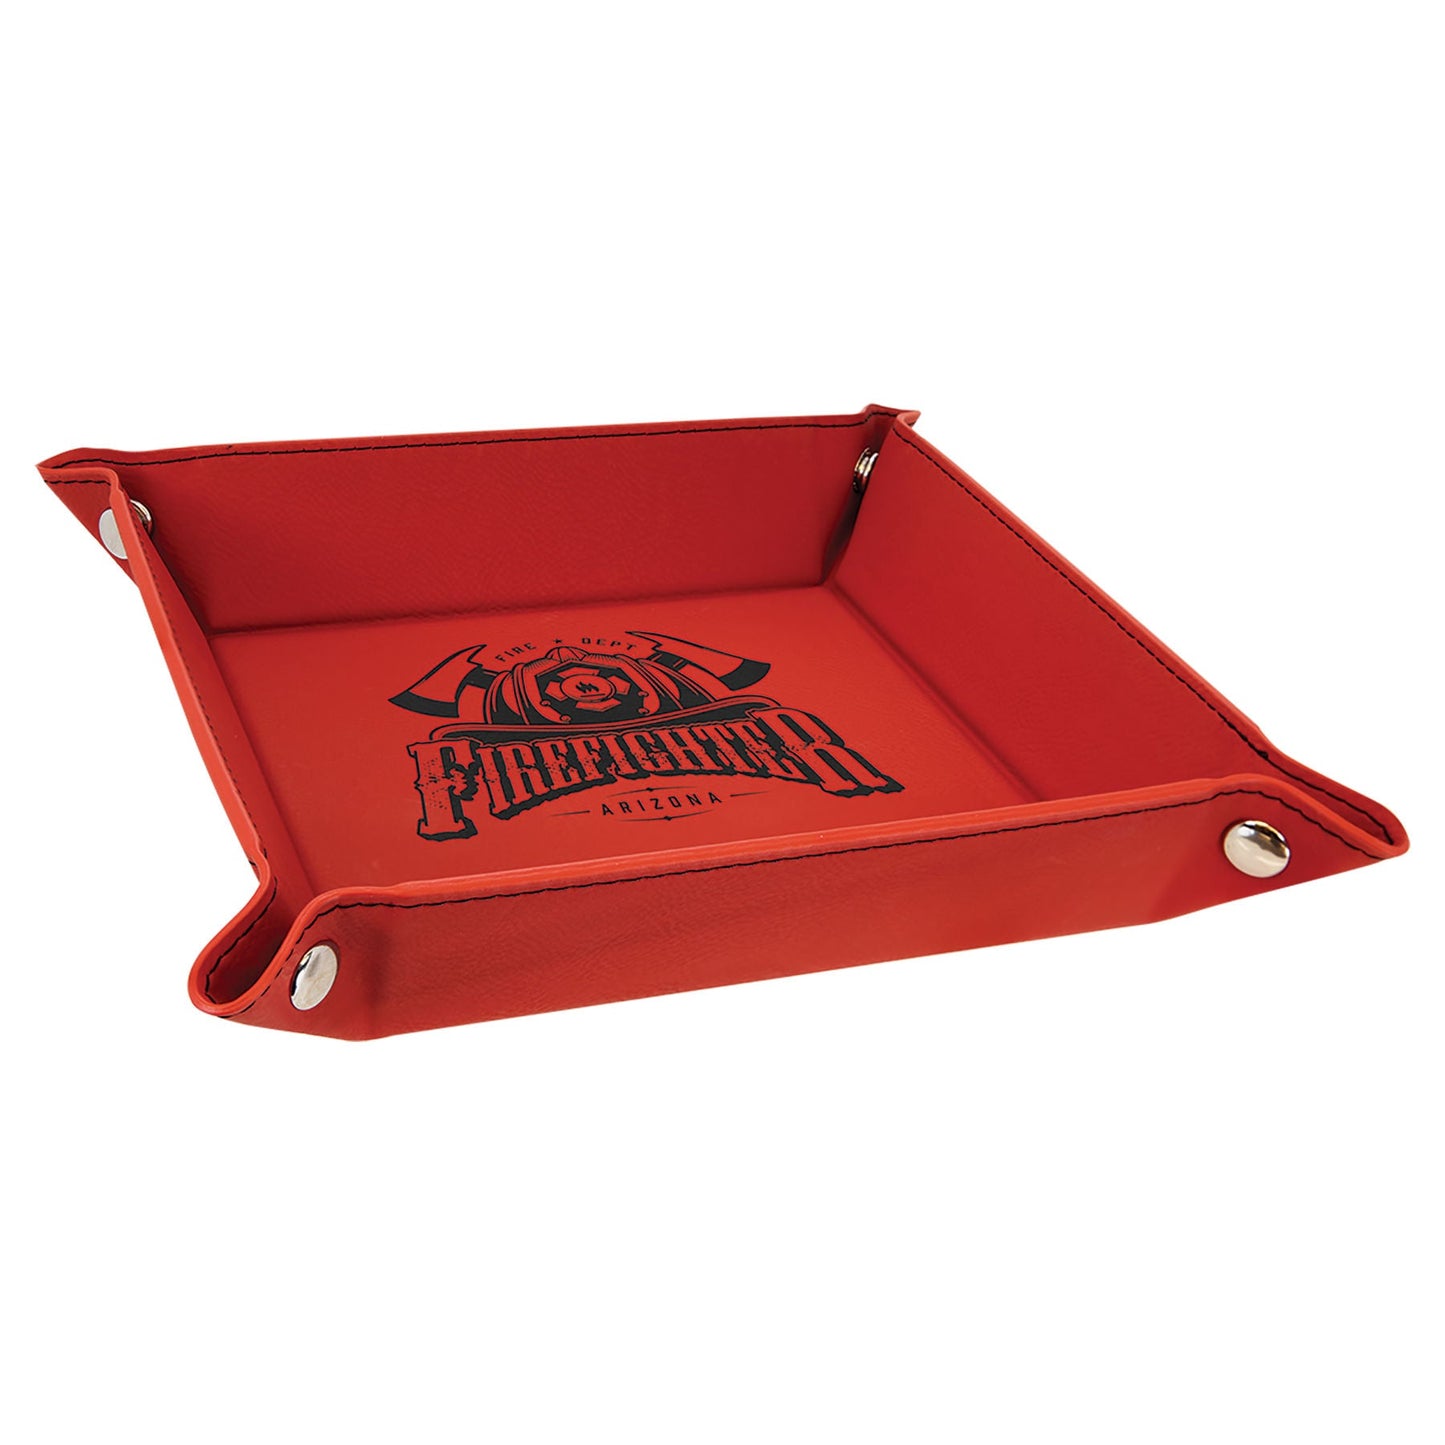 6" x 6" Laserable Leatherette Snap Up Tray with Snaps - Whoa, Jody Boy!